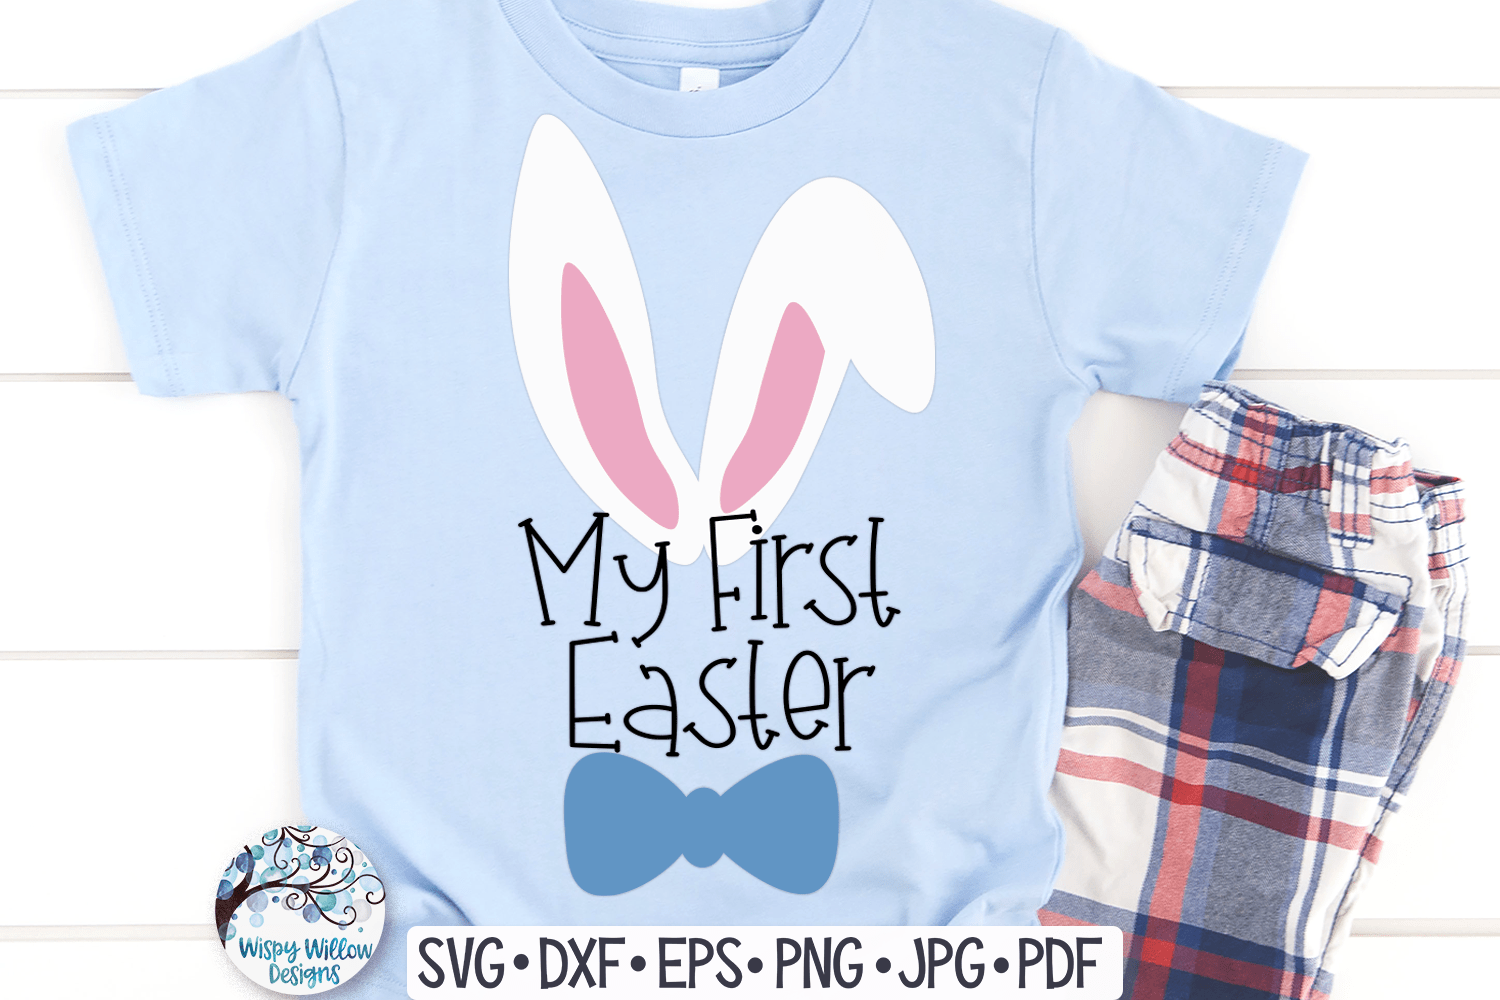 My First Easter SVG - Boy Bunny Wispy Willow Designs Company